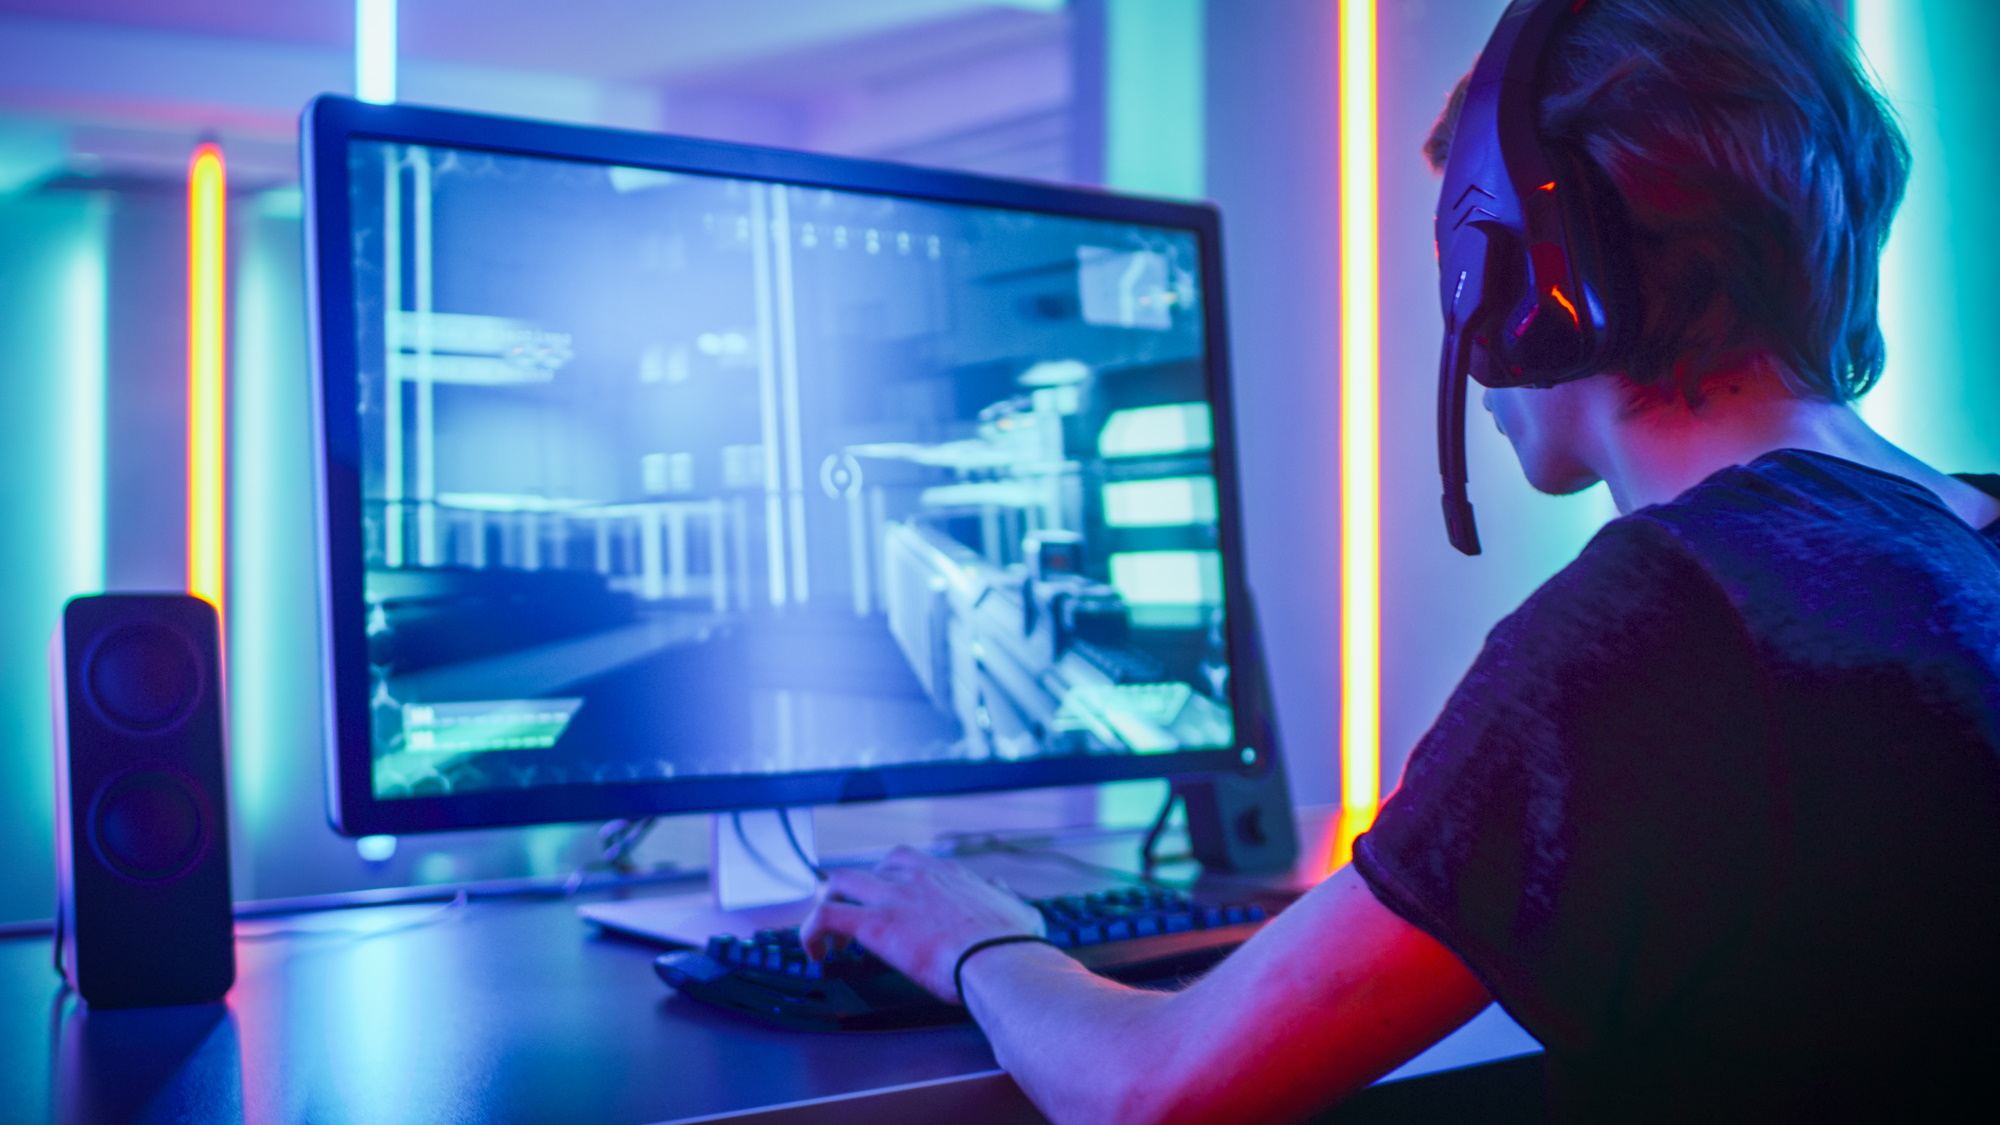 The best gaming VPNs for 2022 - Xfire